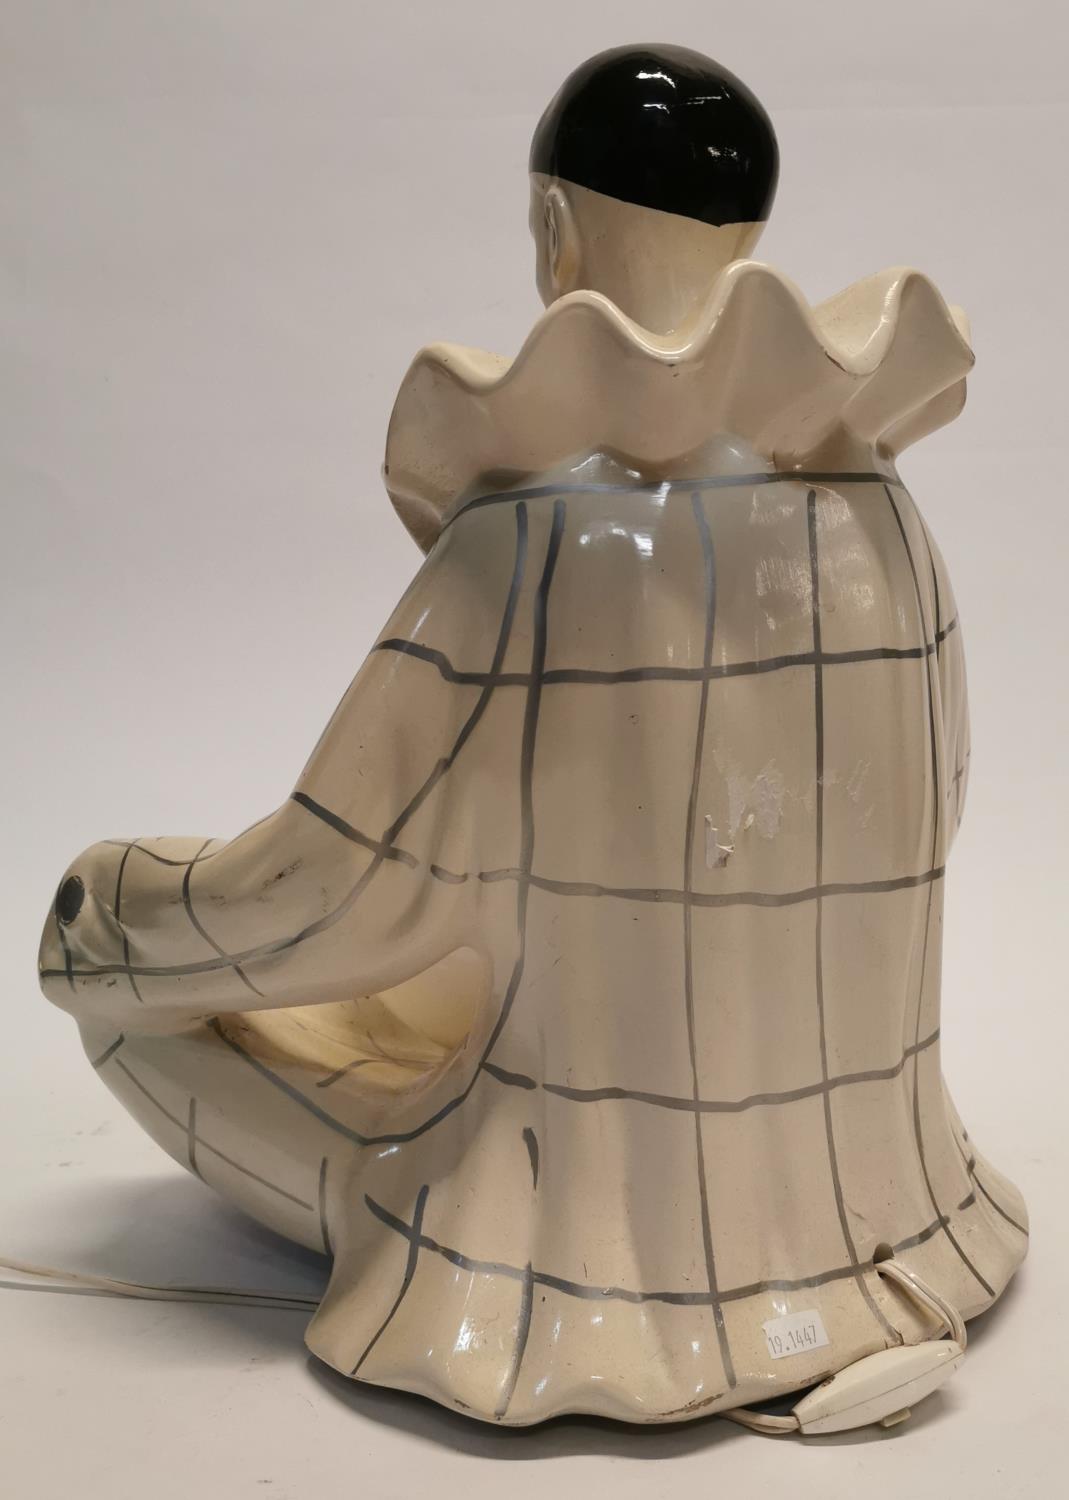 Unusual Art Deco style table lamp in the form of a seated clown - Image 2 of 2